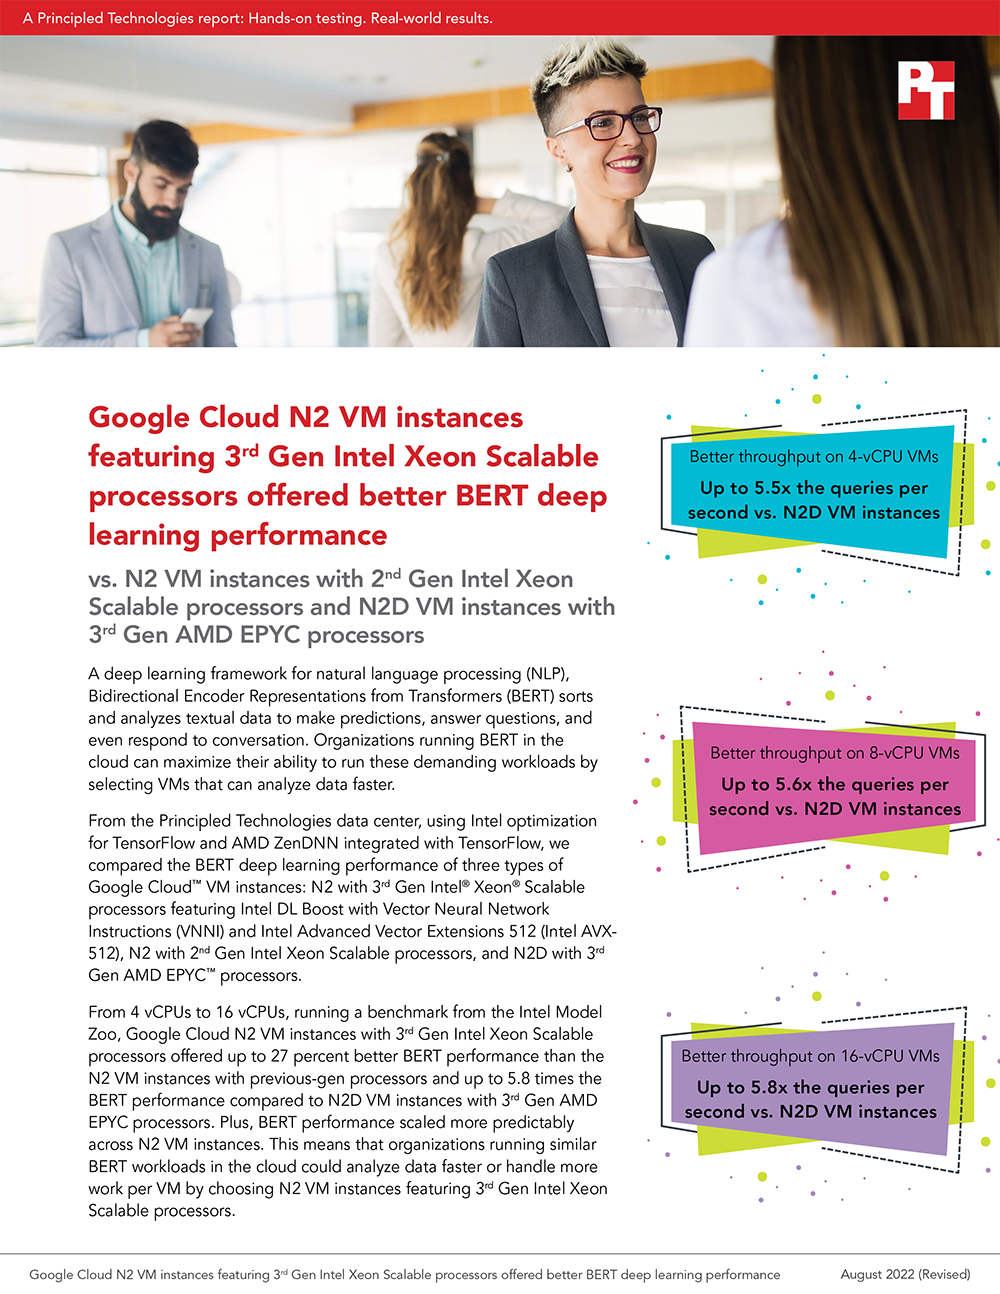 Principled Technologies Releases Study Comparing the BERT Performance of Google Cloud N2 and N2D VM Instances